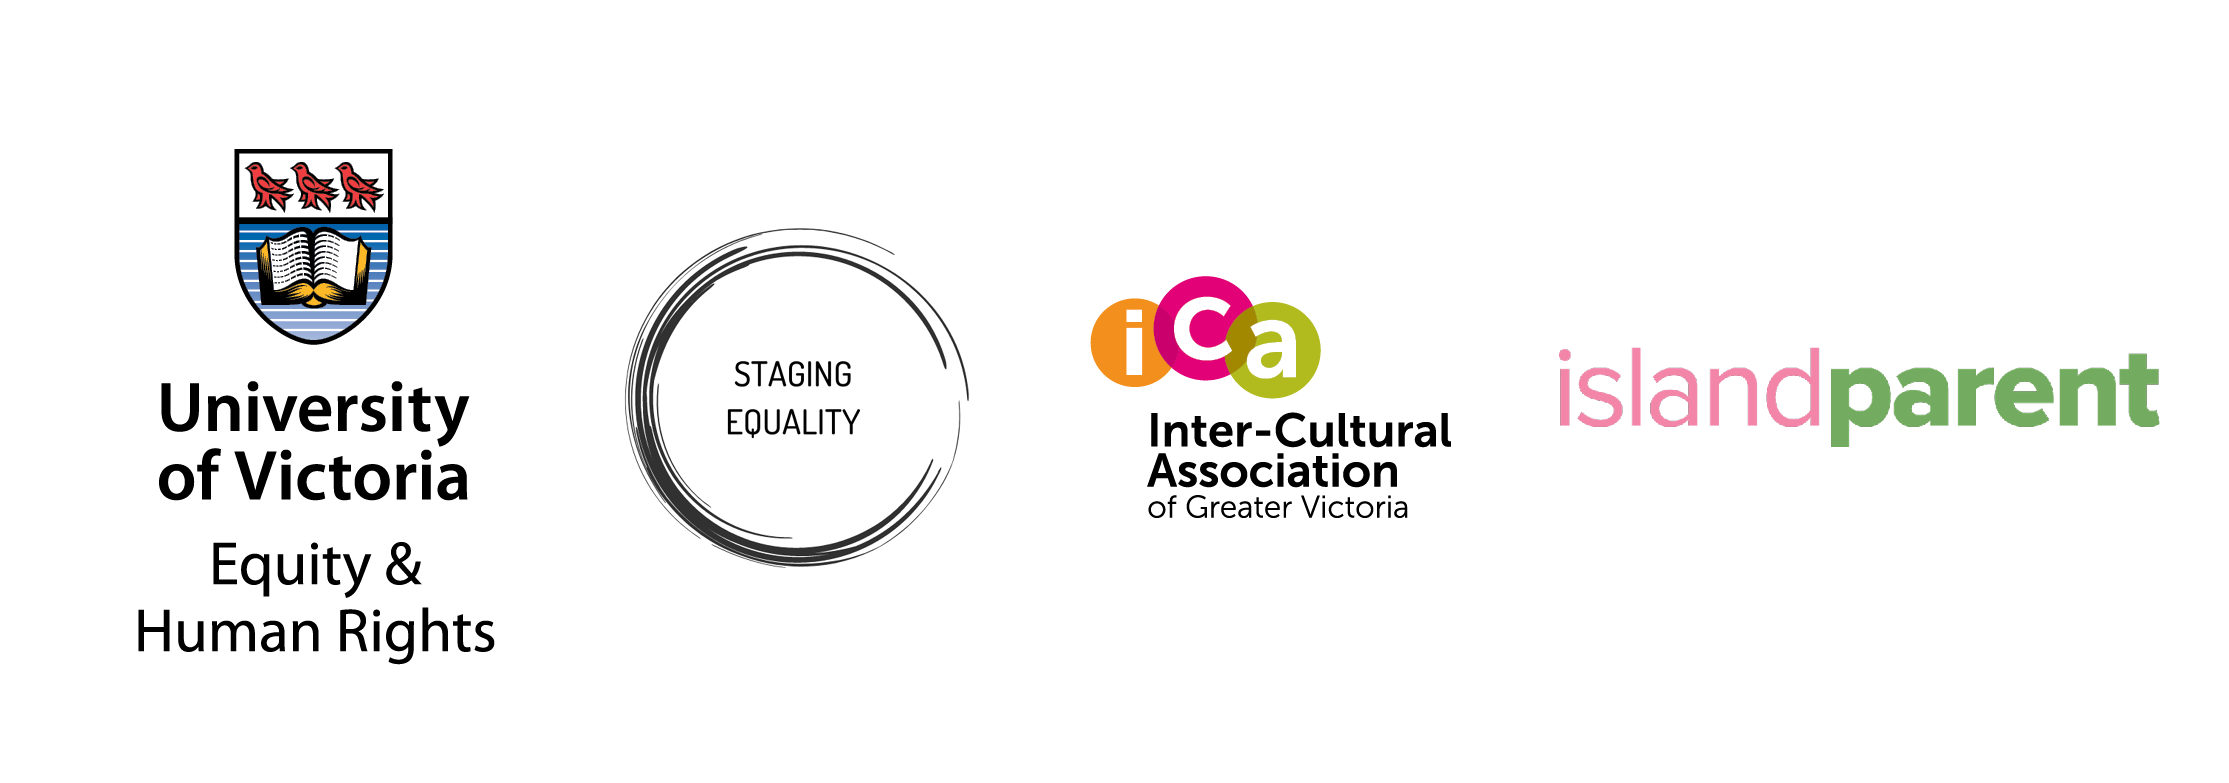 Three logos for UVic, Staging Equality and ICA